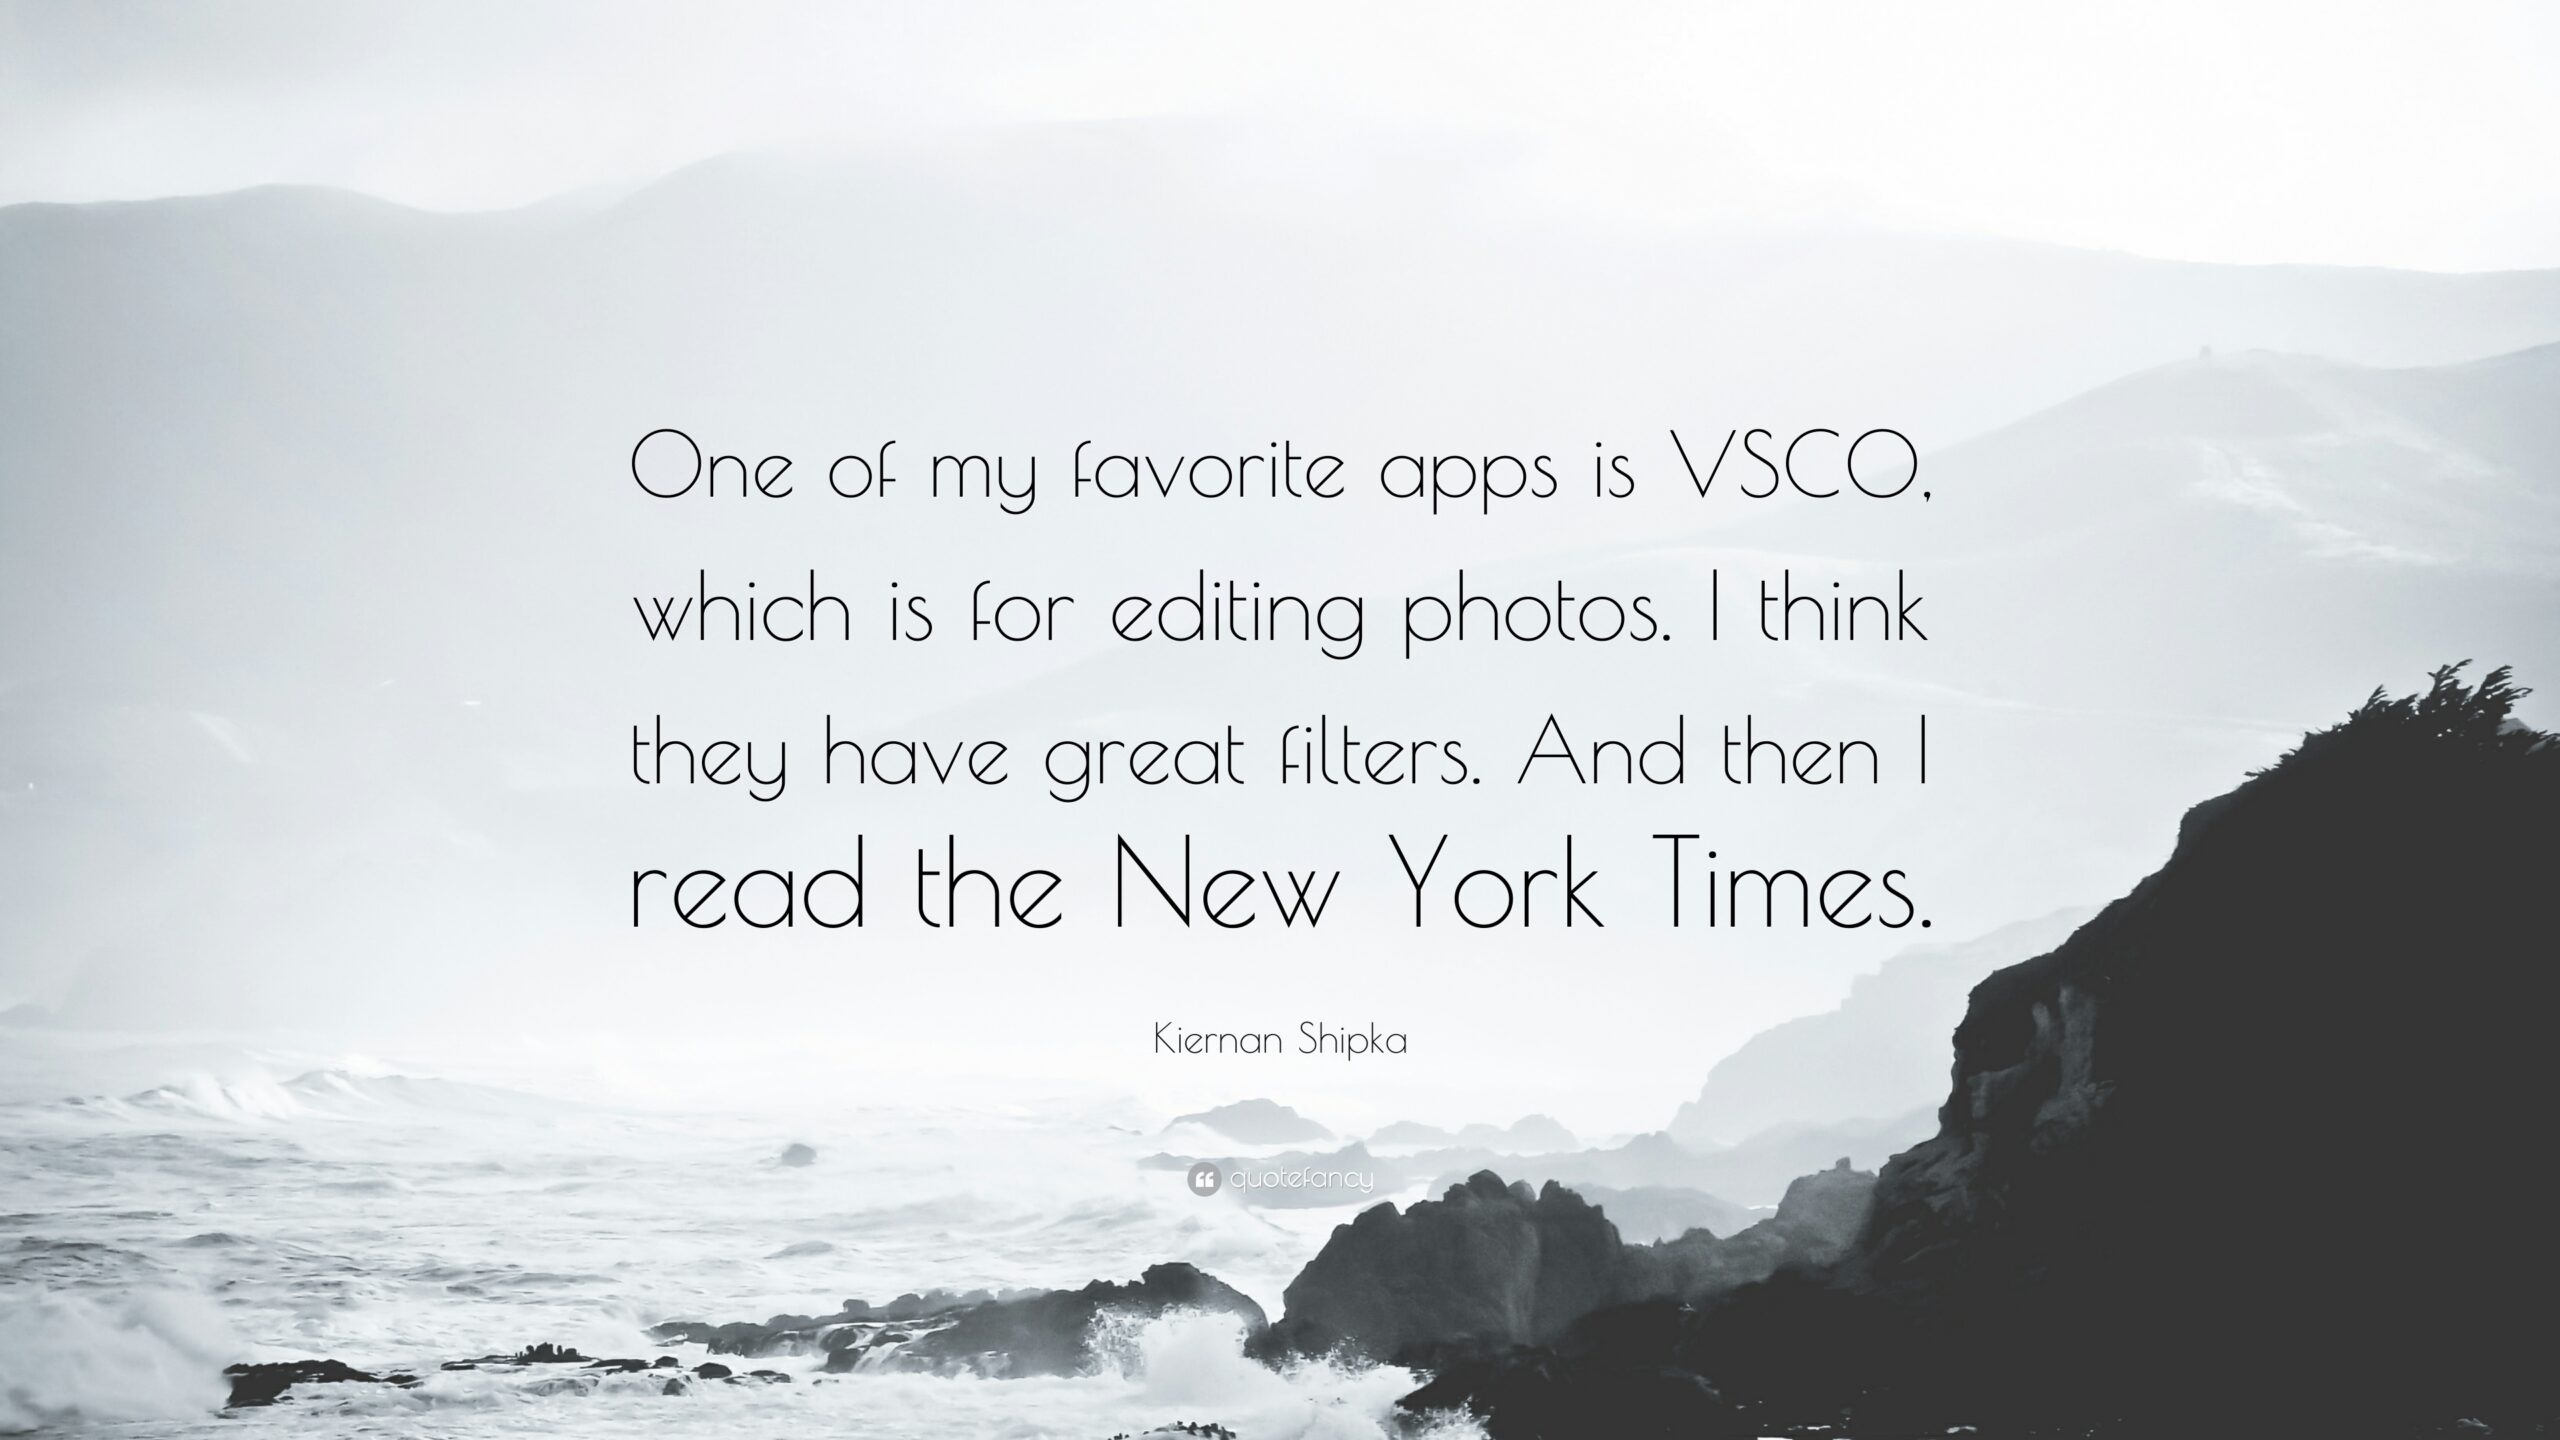 Kiernan Shipka Quote “One of my favorite apps is VSCO, which is for